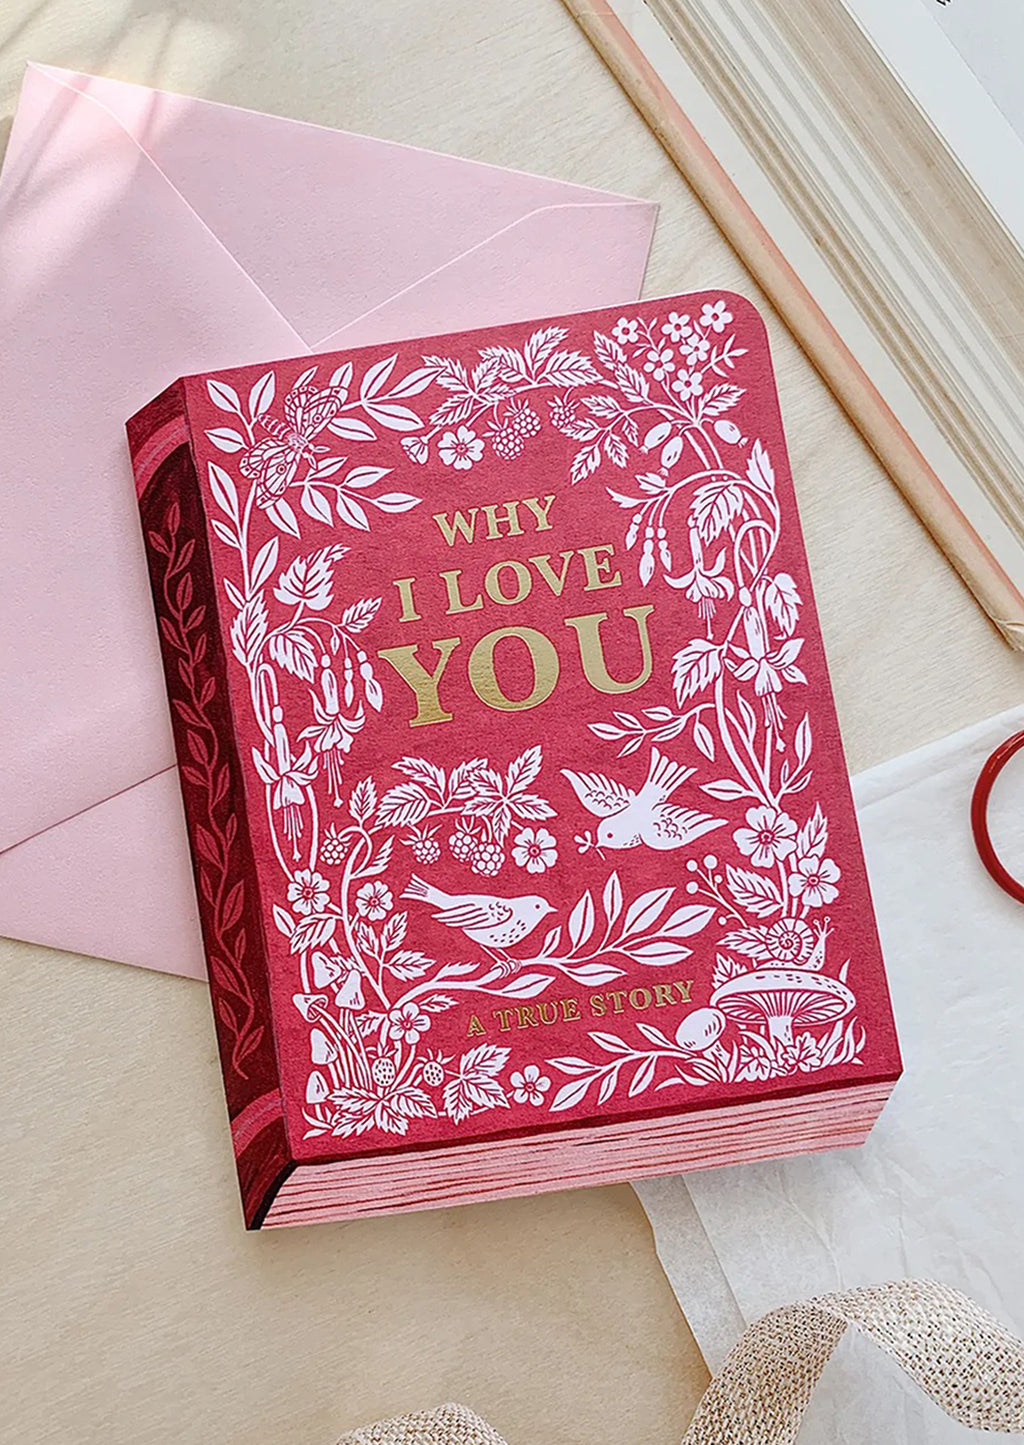 2: A card made to look like a book, reading "Why I love you — a true story".